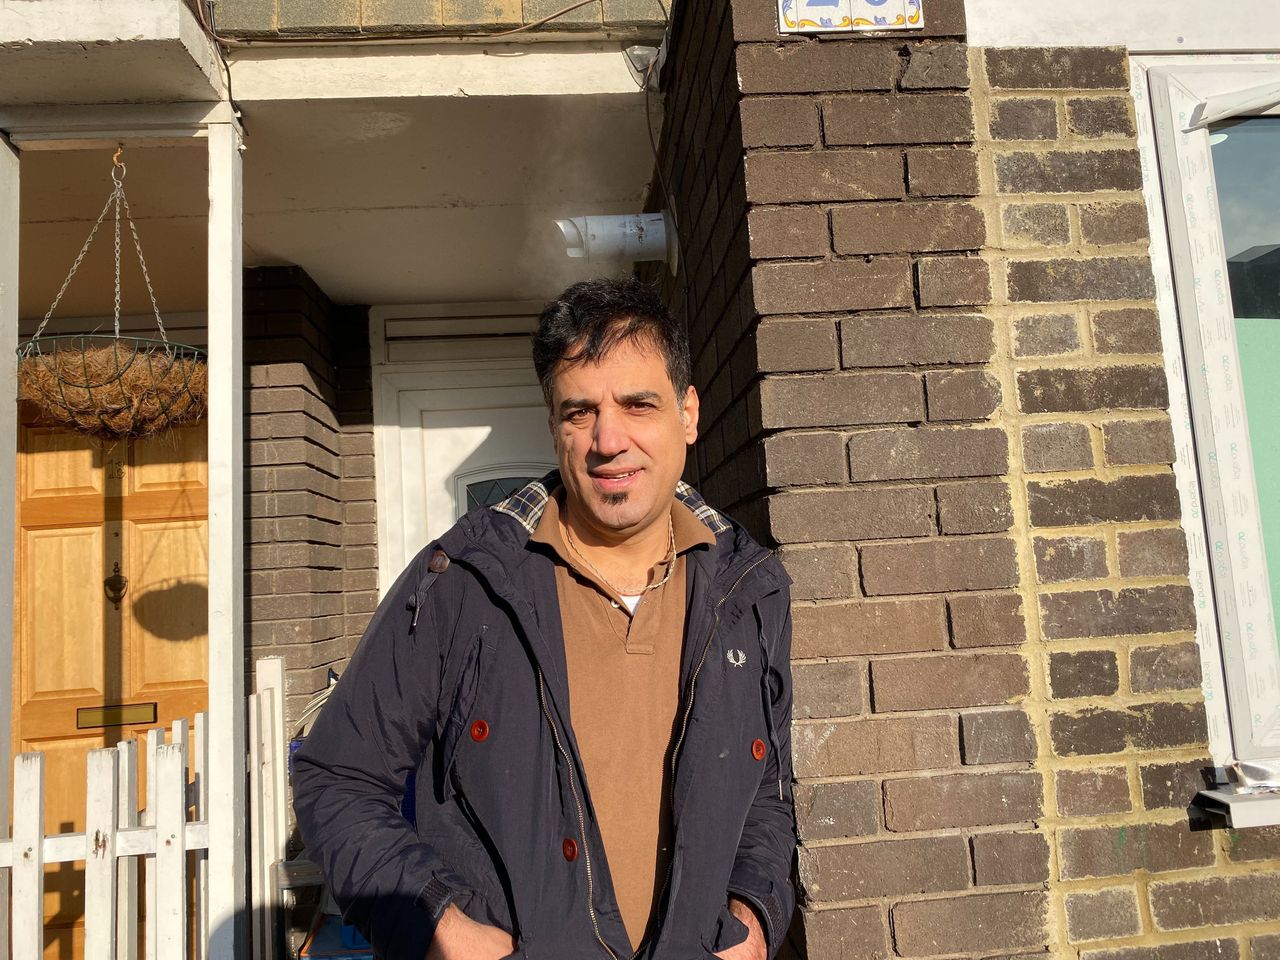 Abbas Hamaraza has lived on the West Kensington estate for the past 12 years 